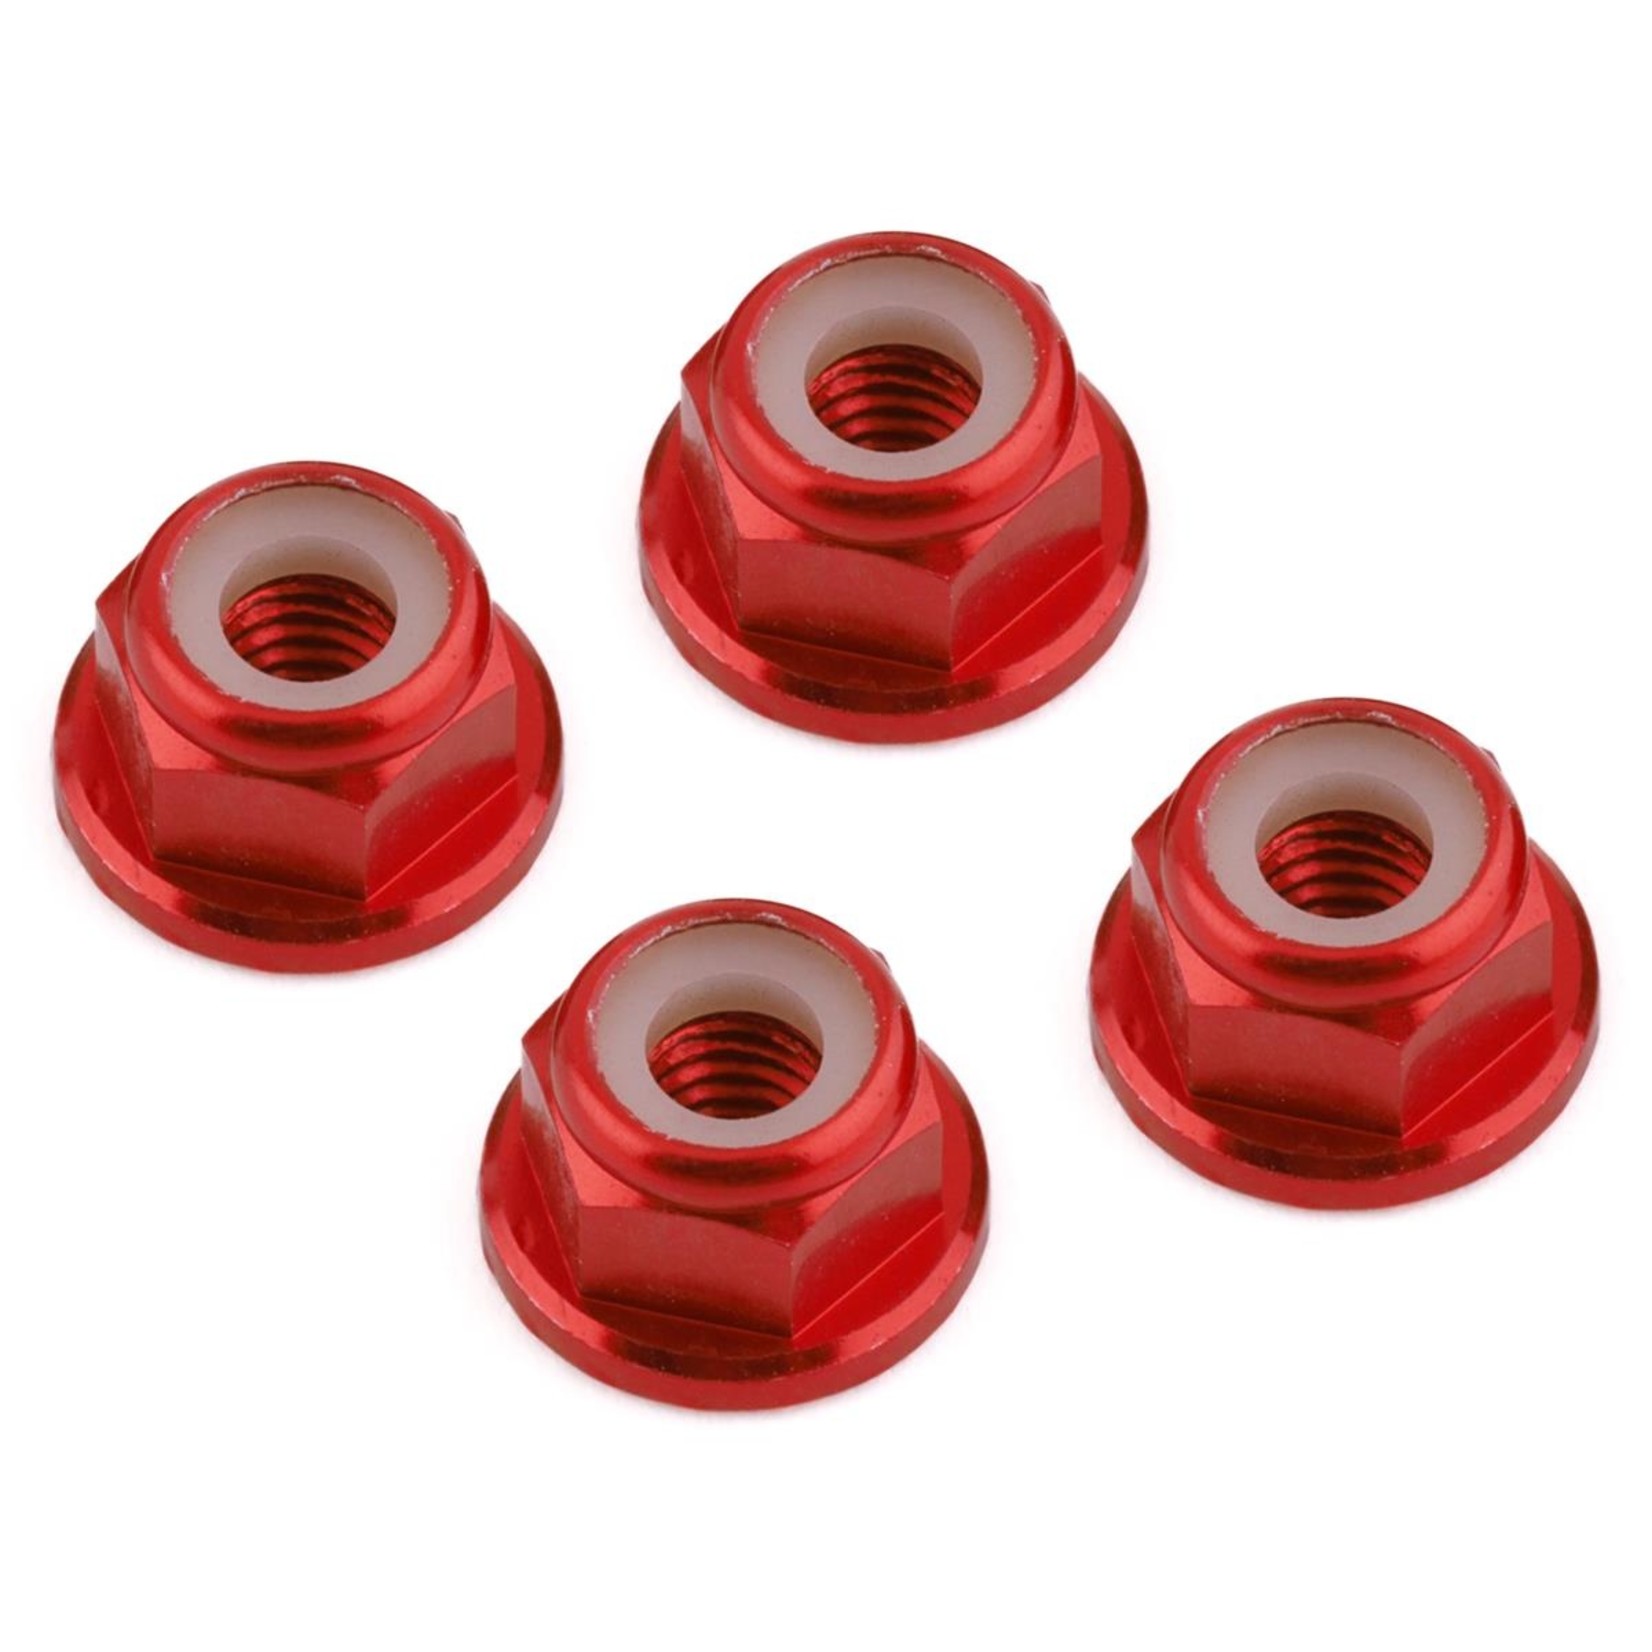 M4 Flanged nuts-Red